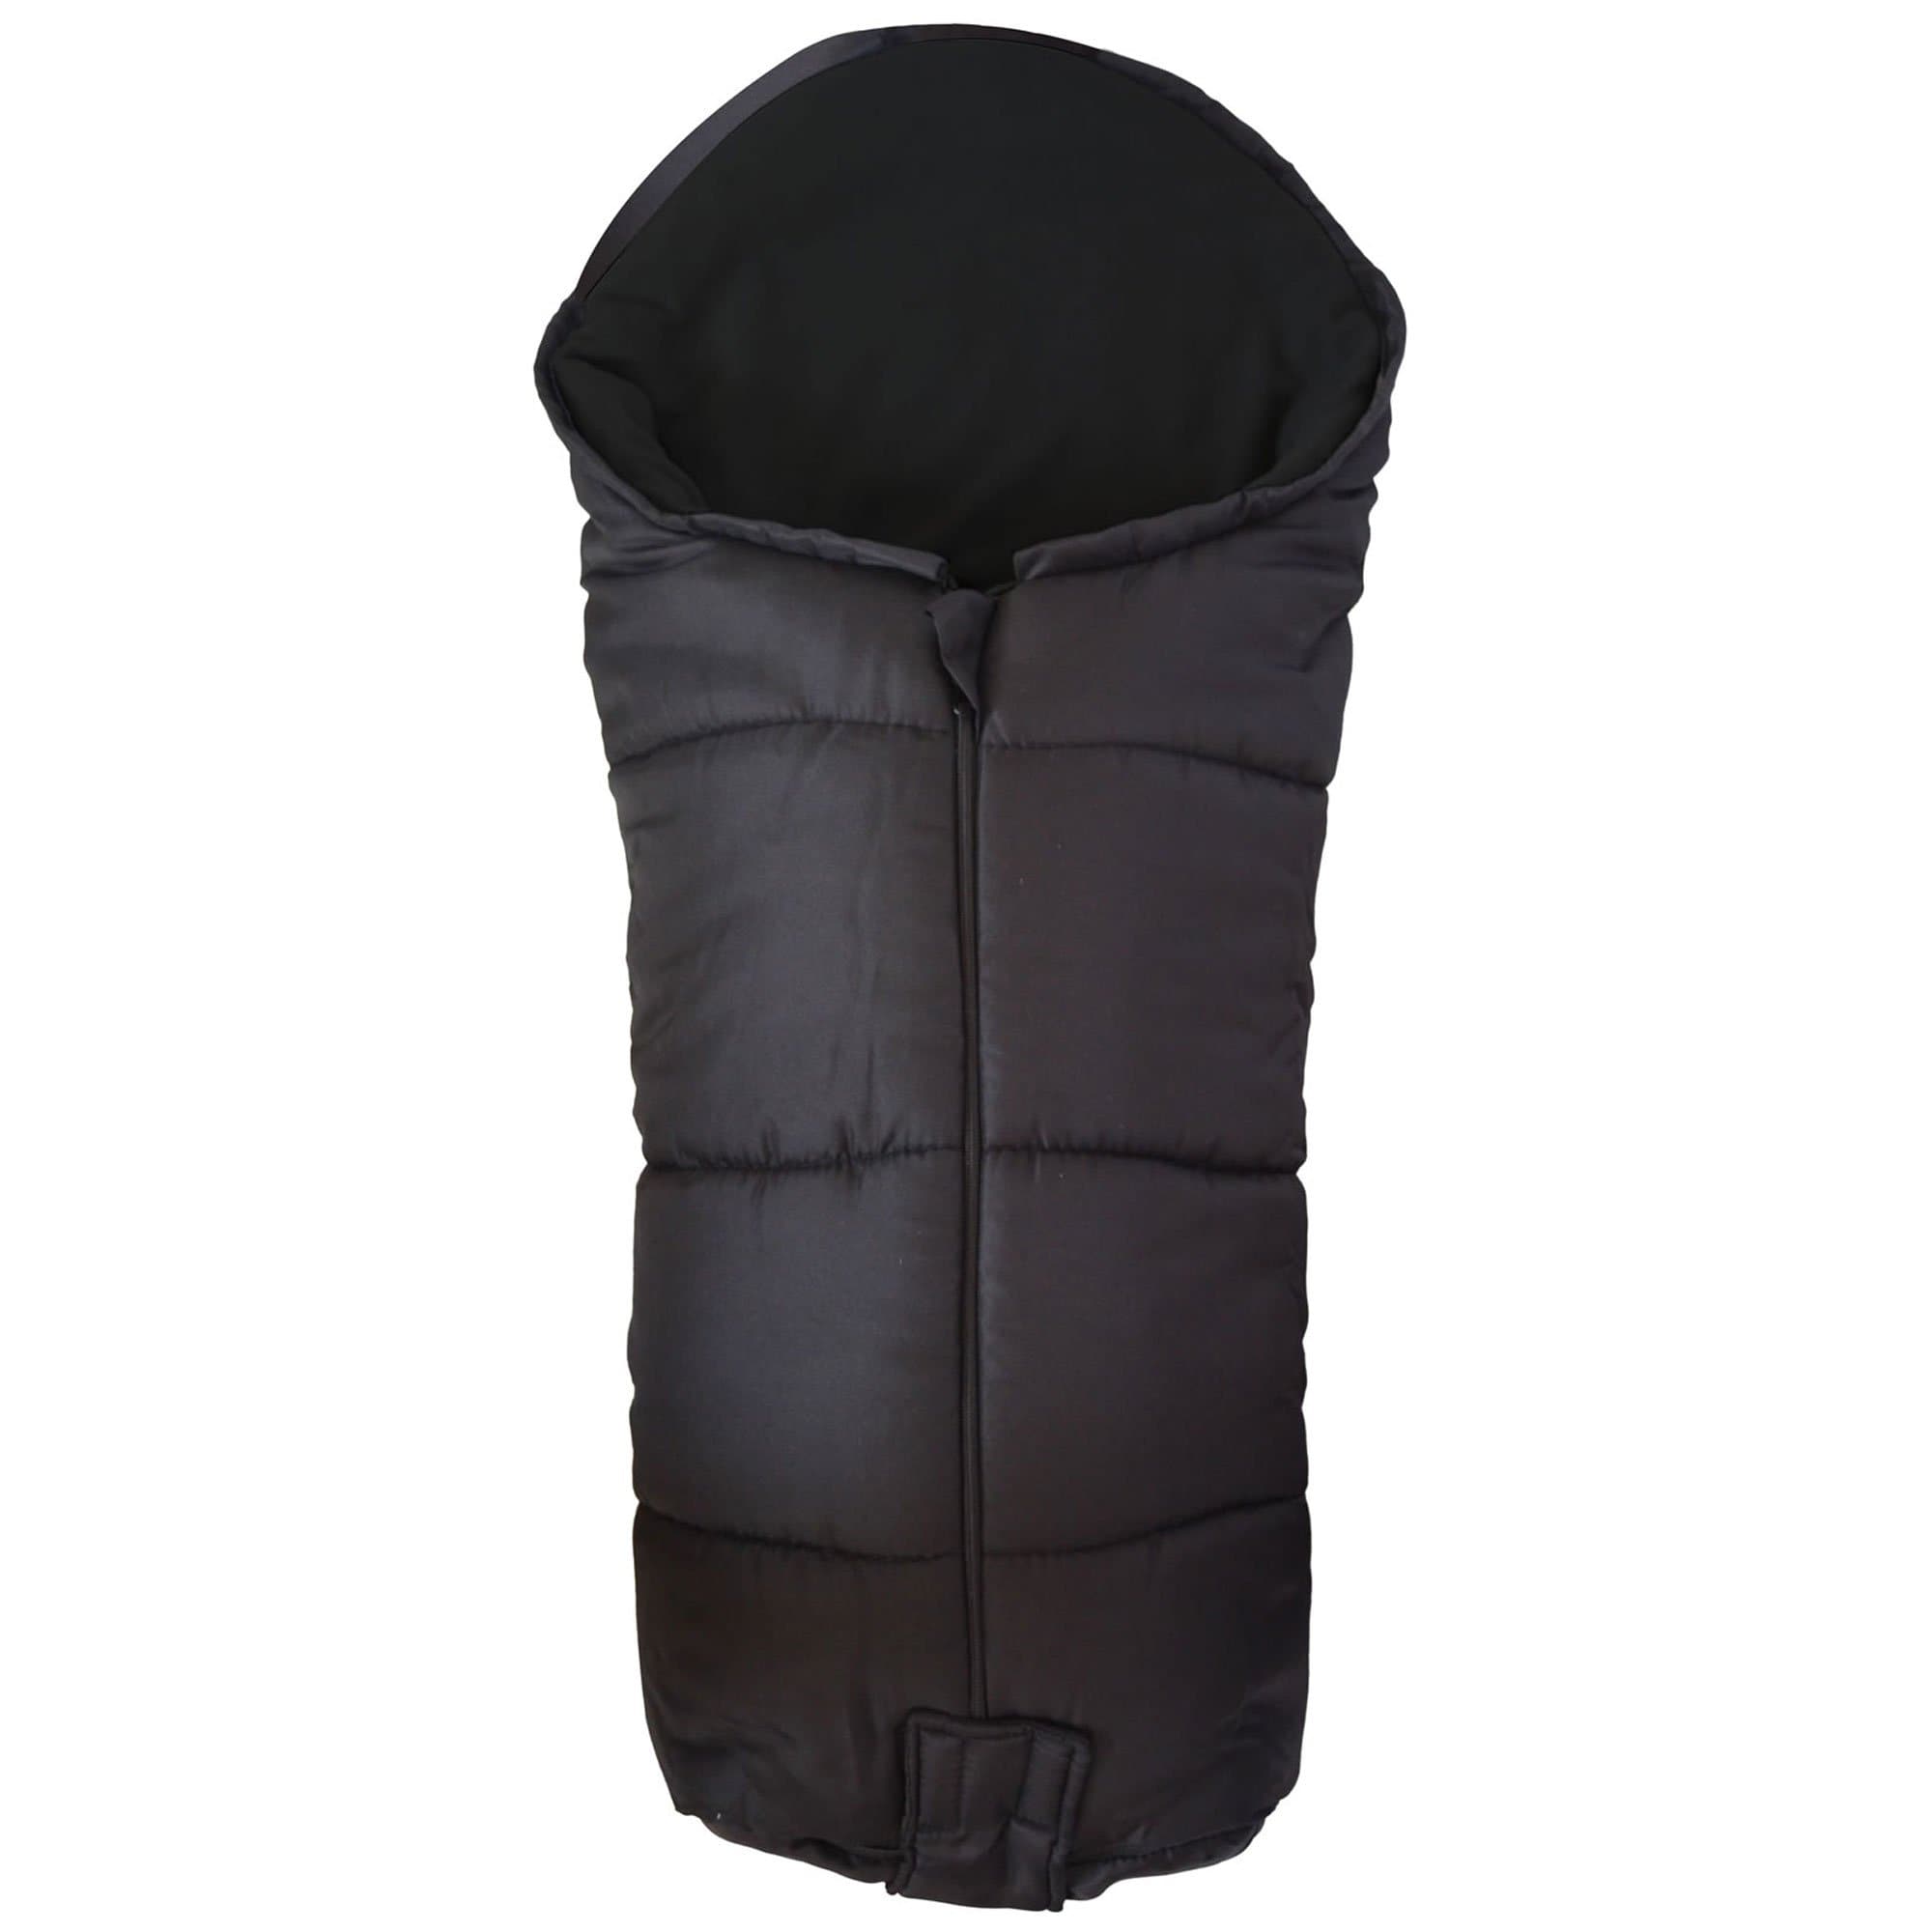 Deluxe Footmuff / Cosy Toes Compatible with Quinny - Black / Fits All Models | For Your Little One